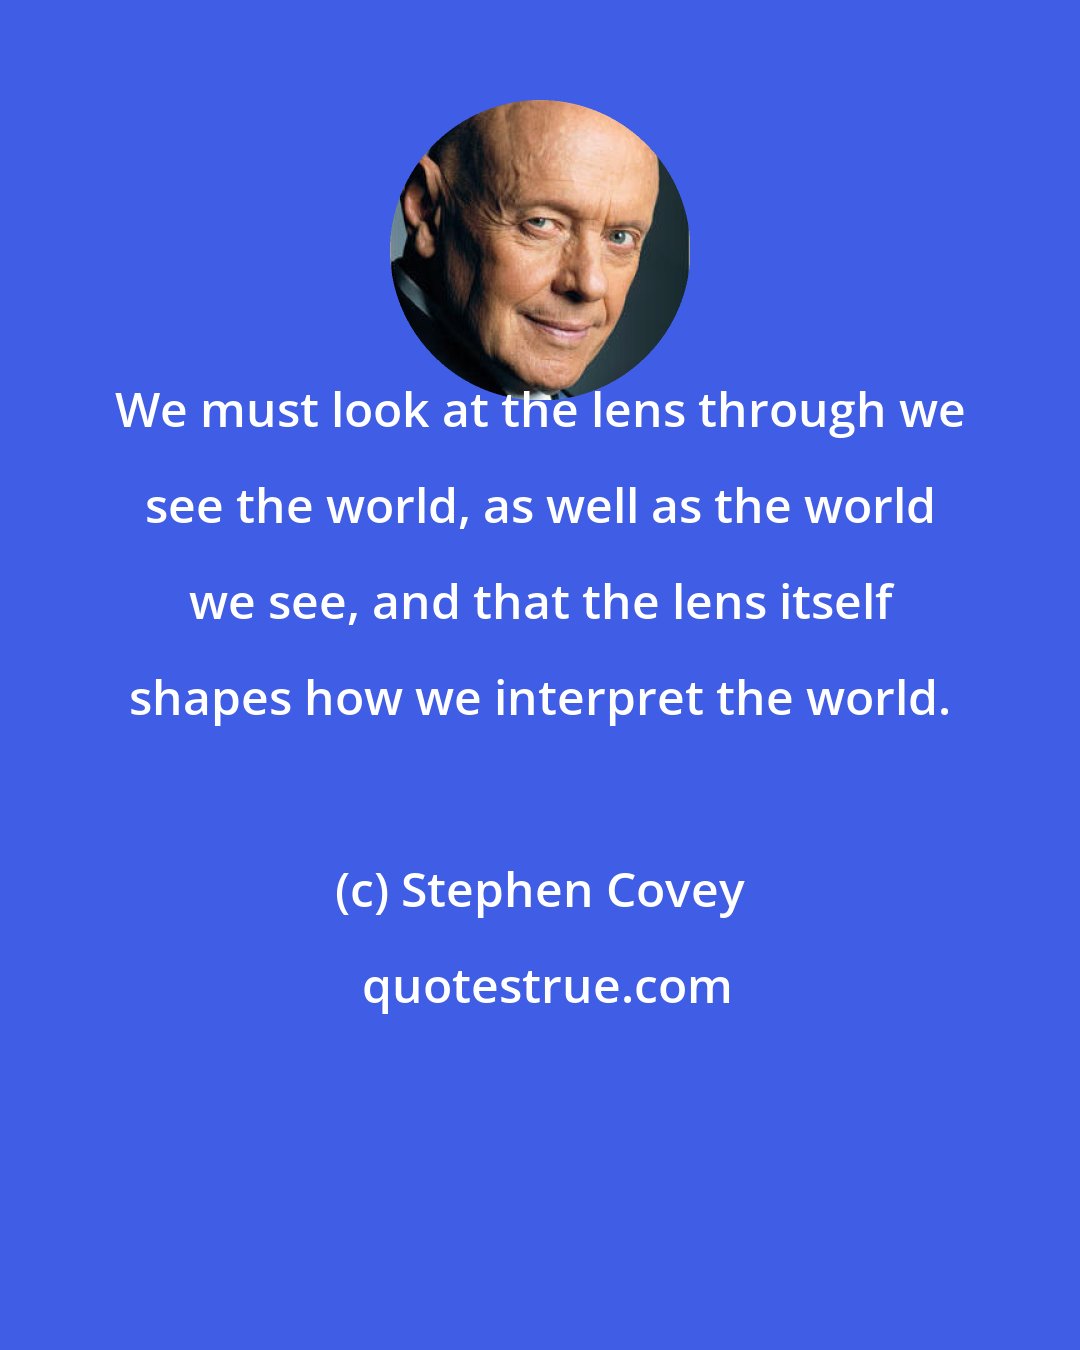 Stephen Covey: We must look at the lens through we see the world, as well as the world we see, and that the lens itself shapes how we interpret the world.